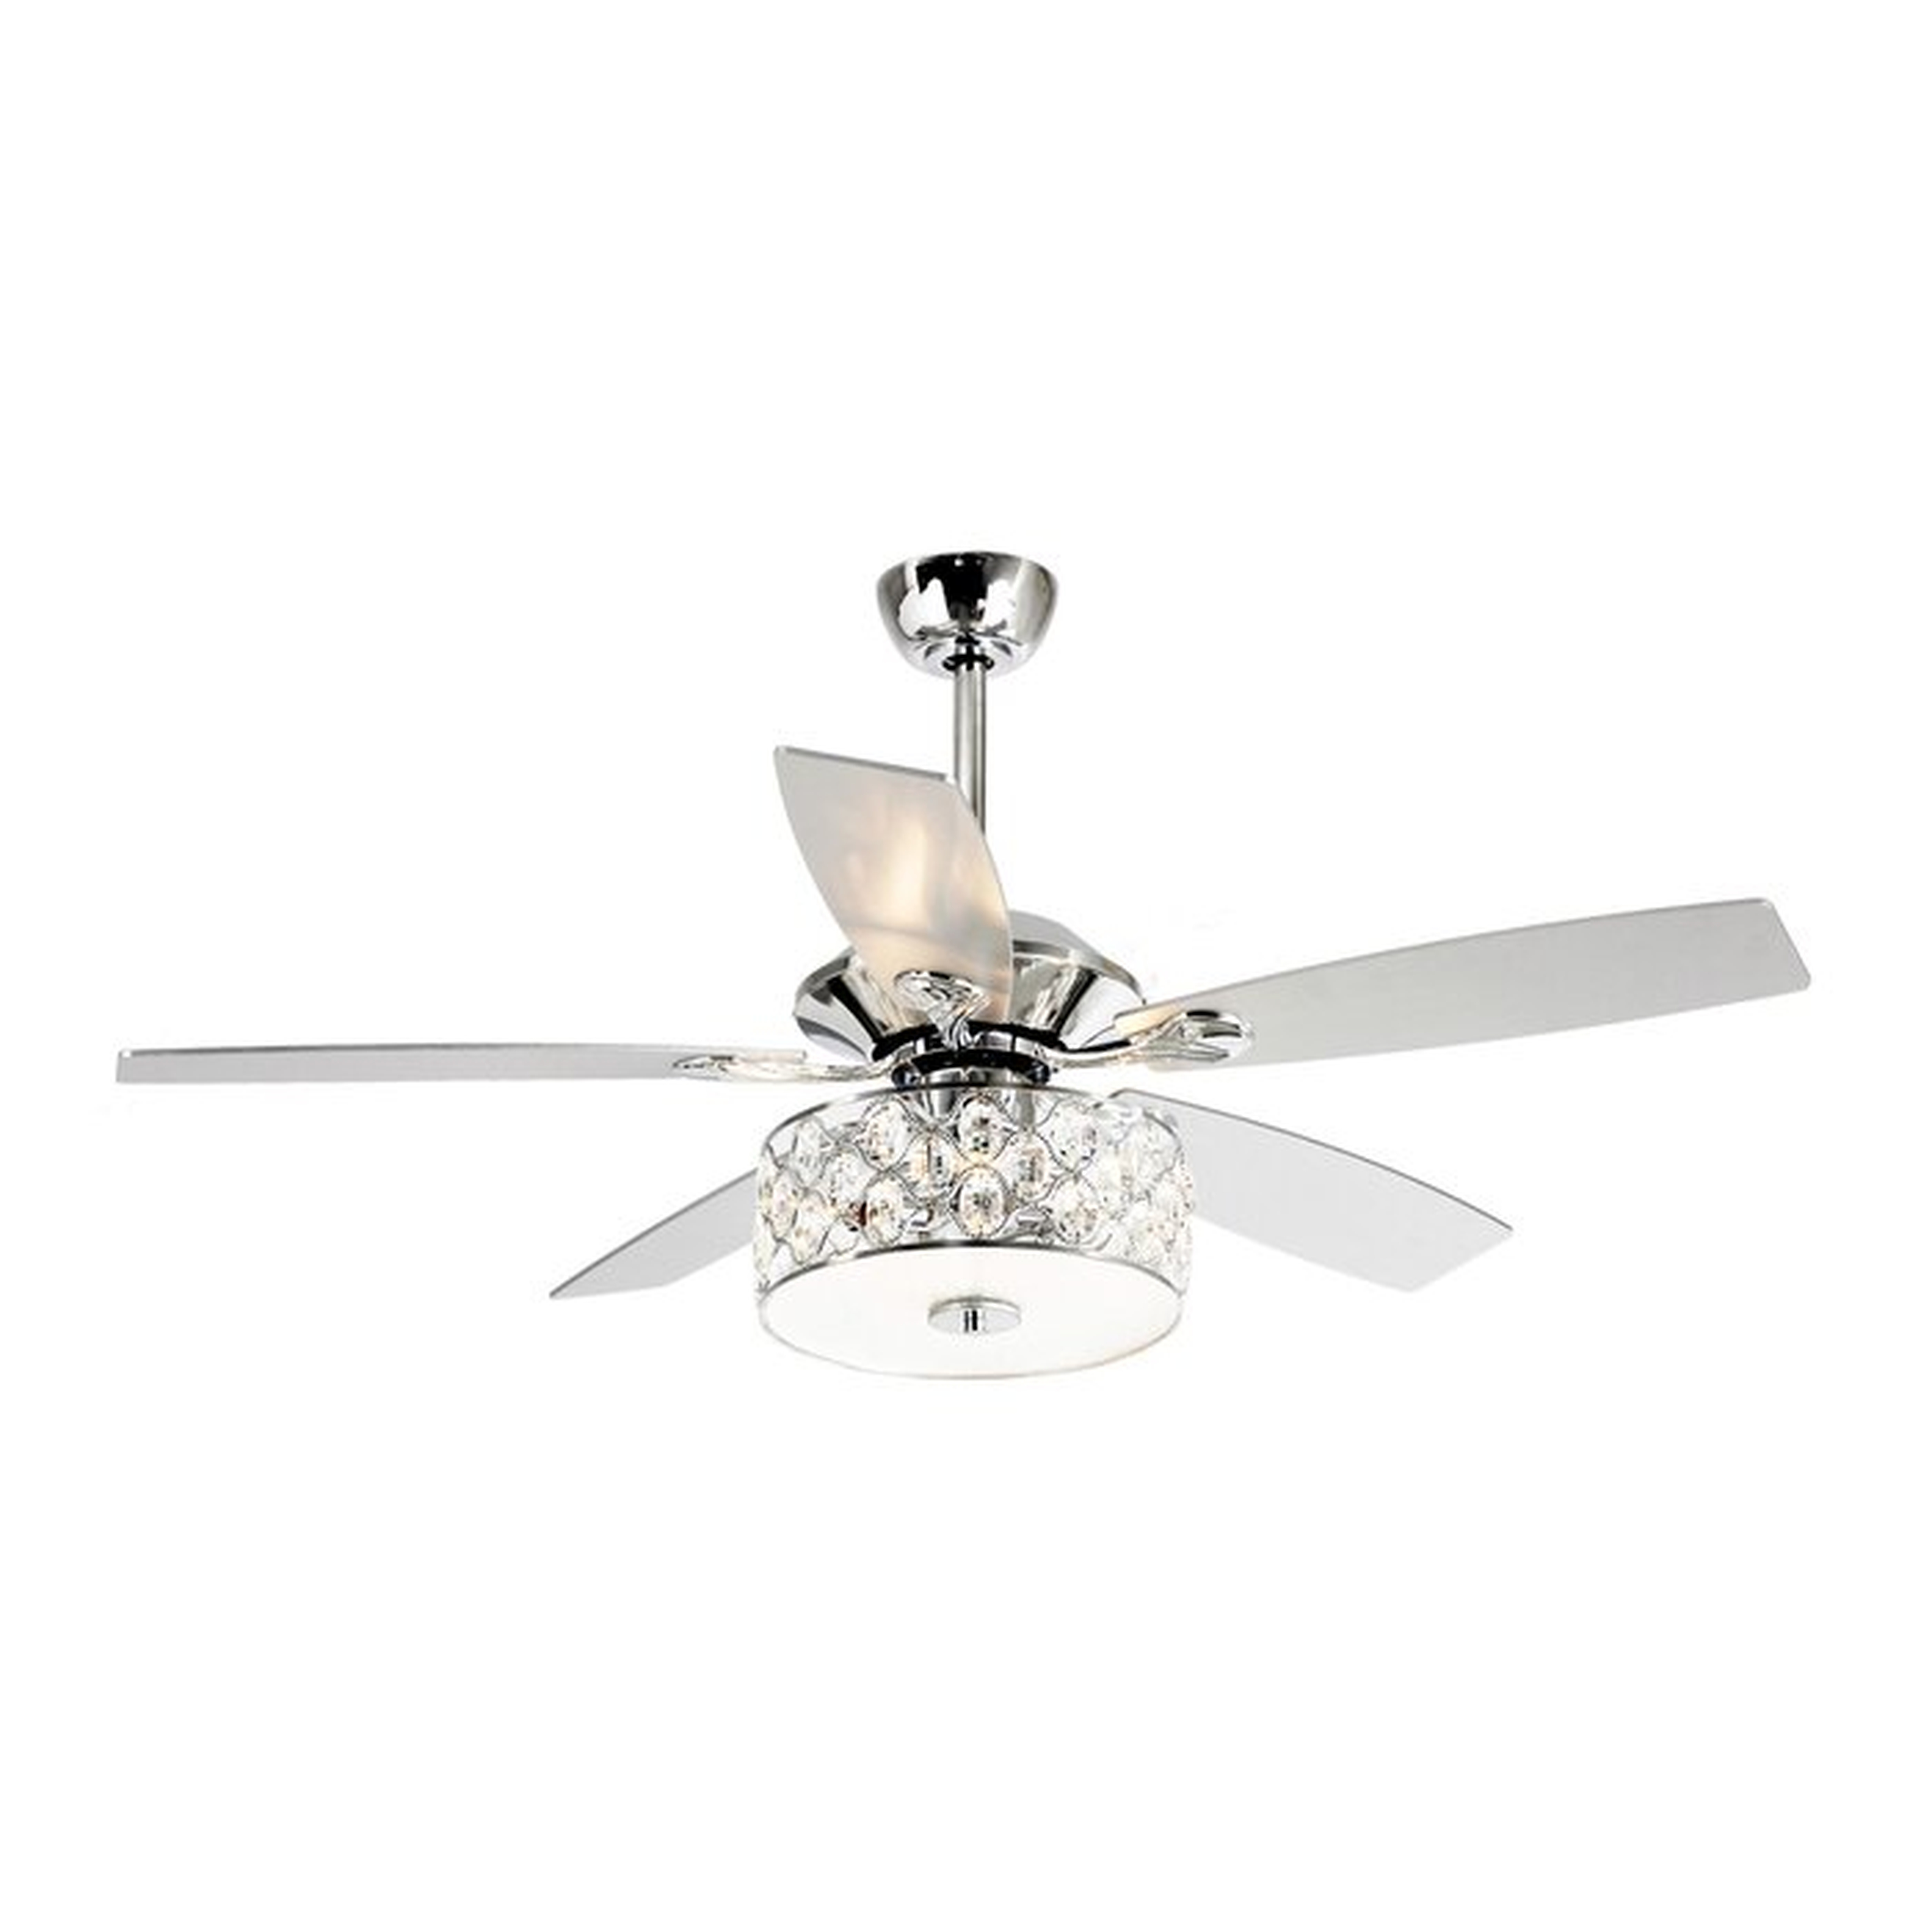 52" Palladino 5 - Blade Ceiling Fan with Remote Control and Light Kit Included - Birch Lane